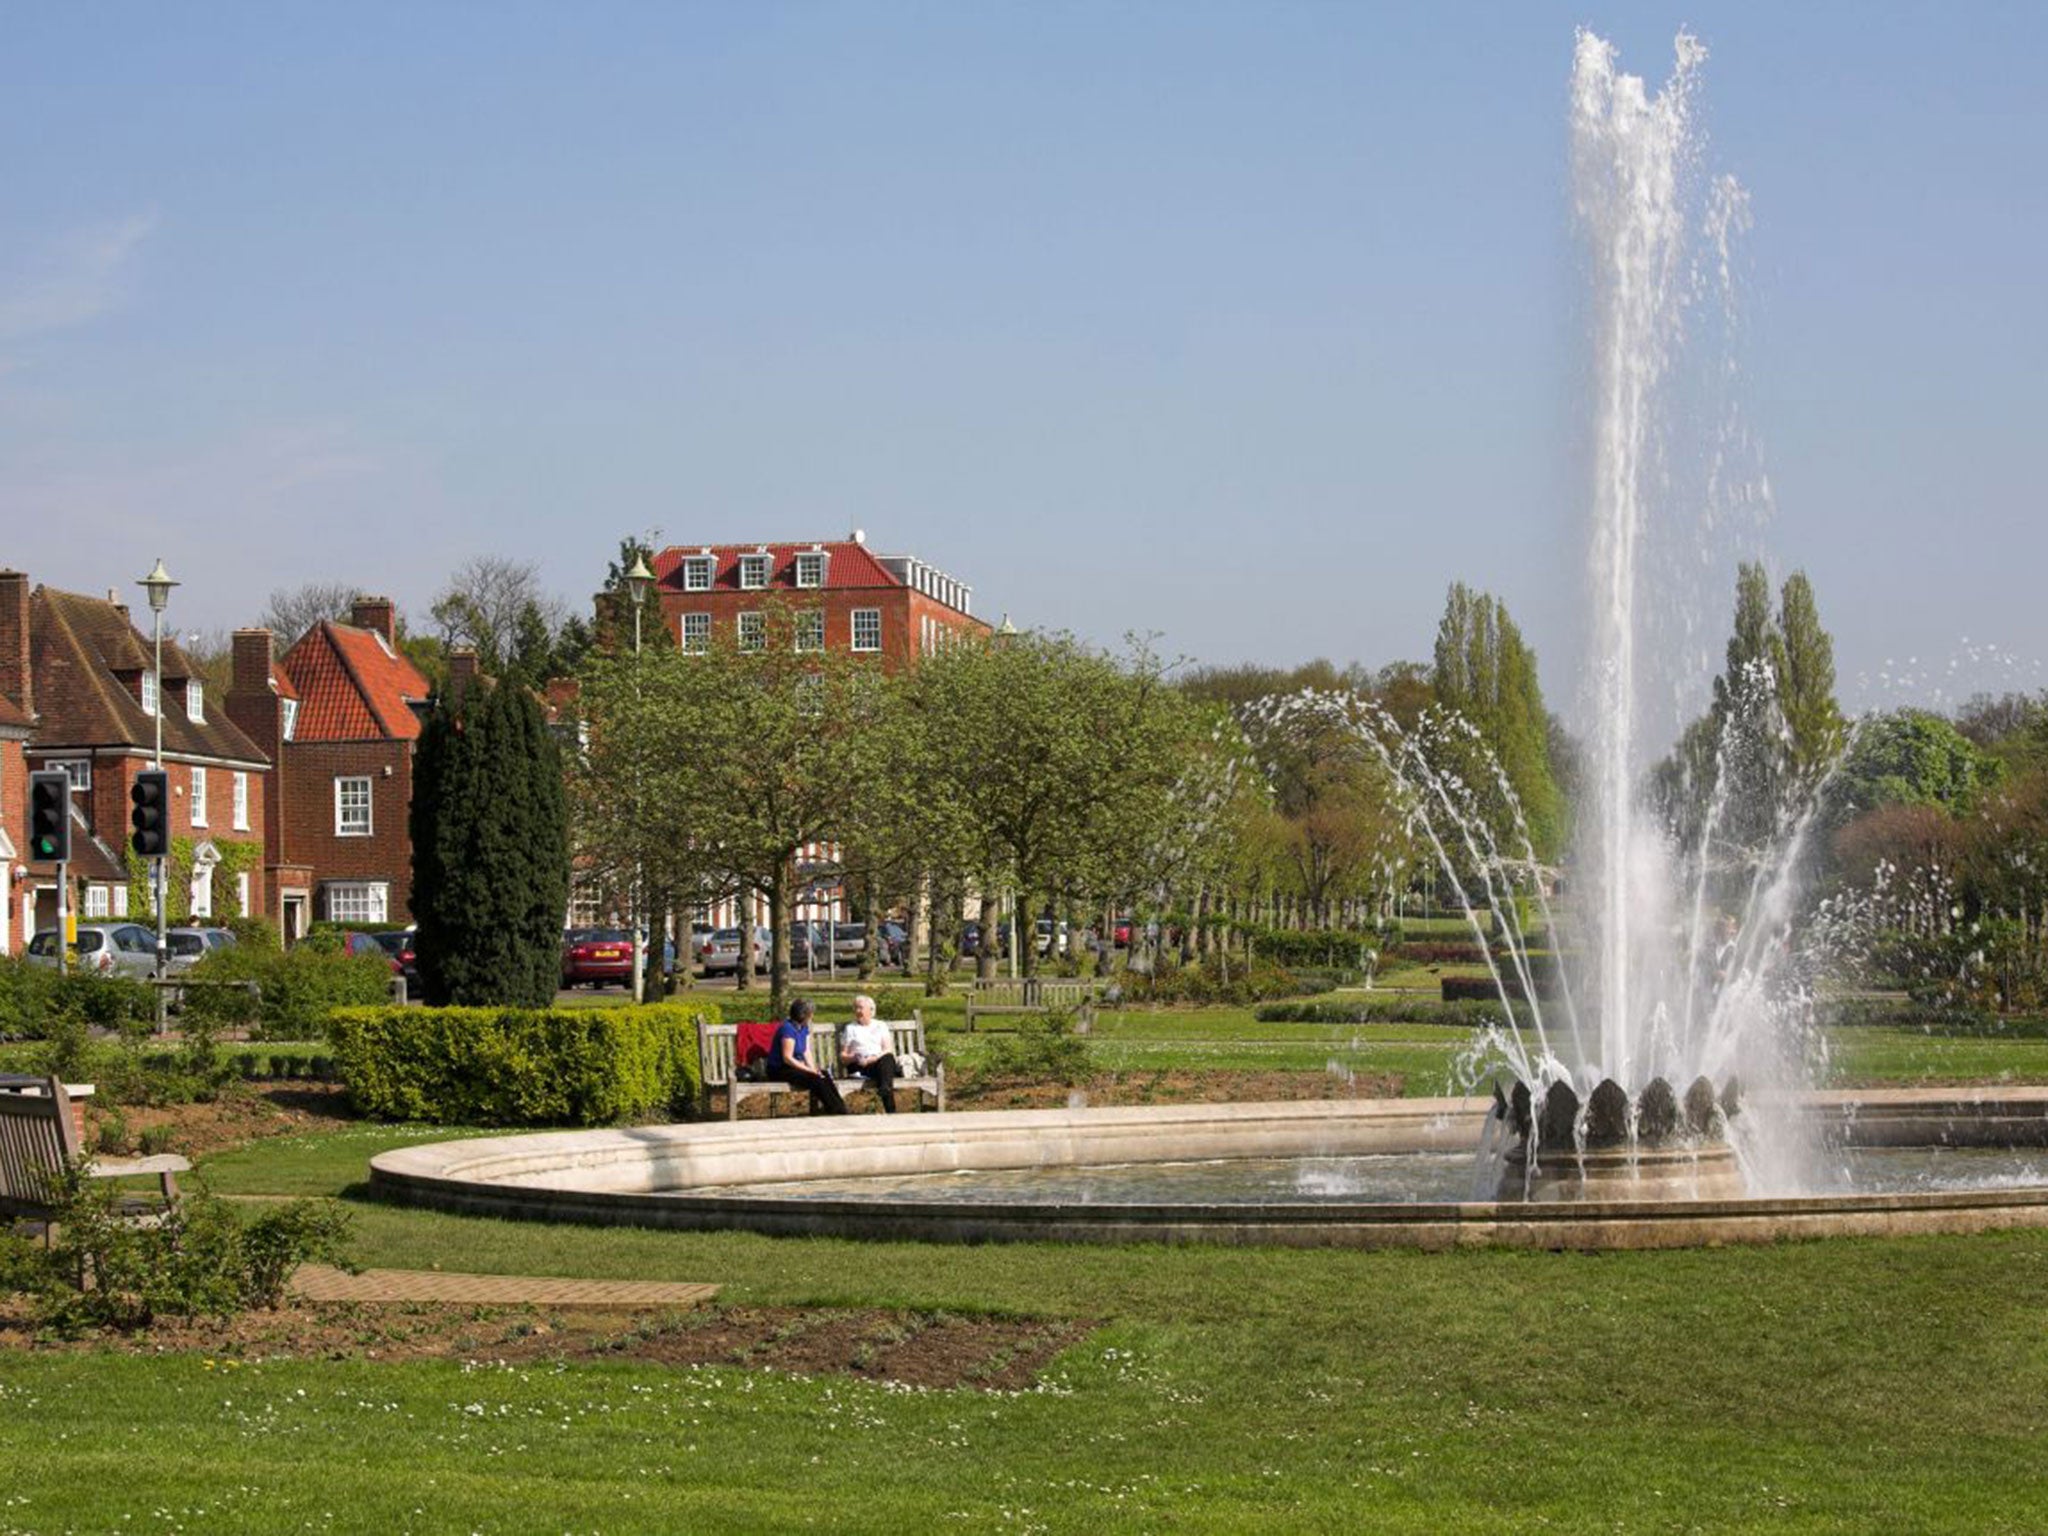 A fountain on the campus at Welwyn Garden City in Hertfordshire